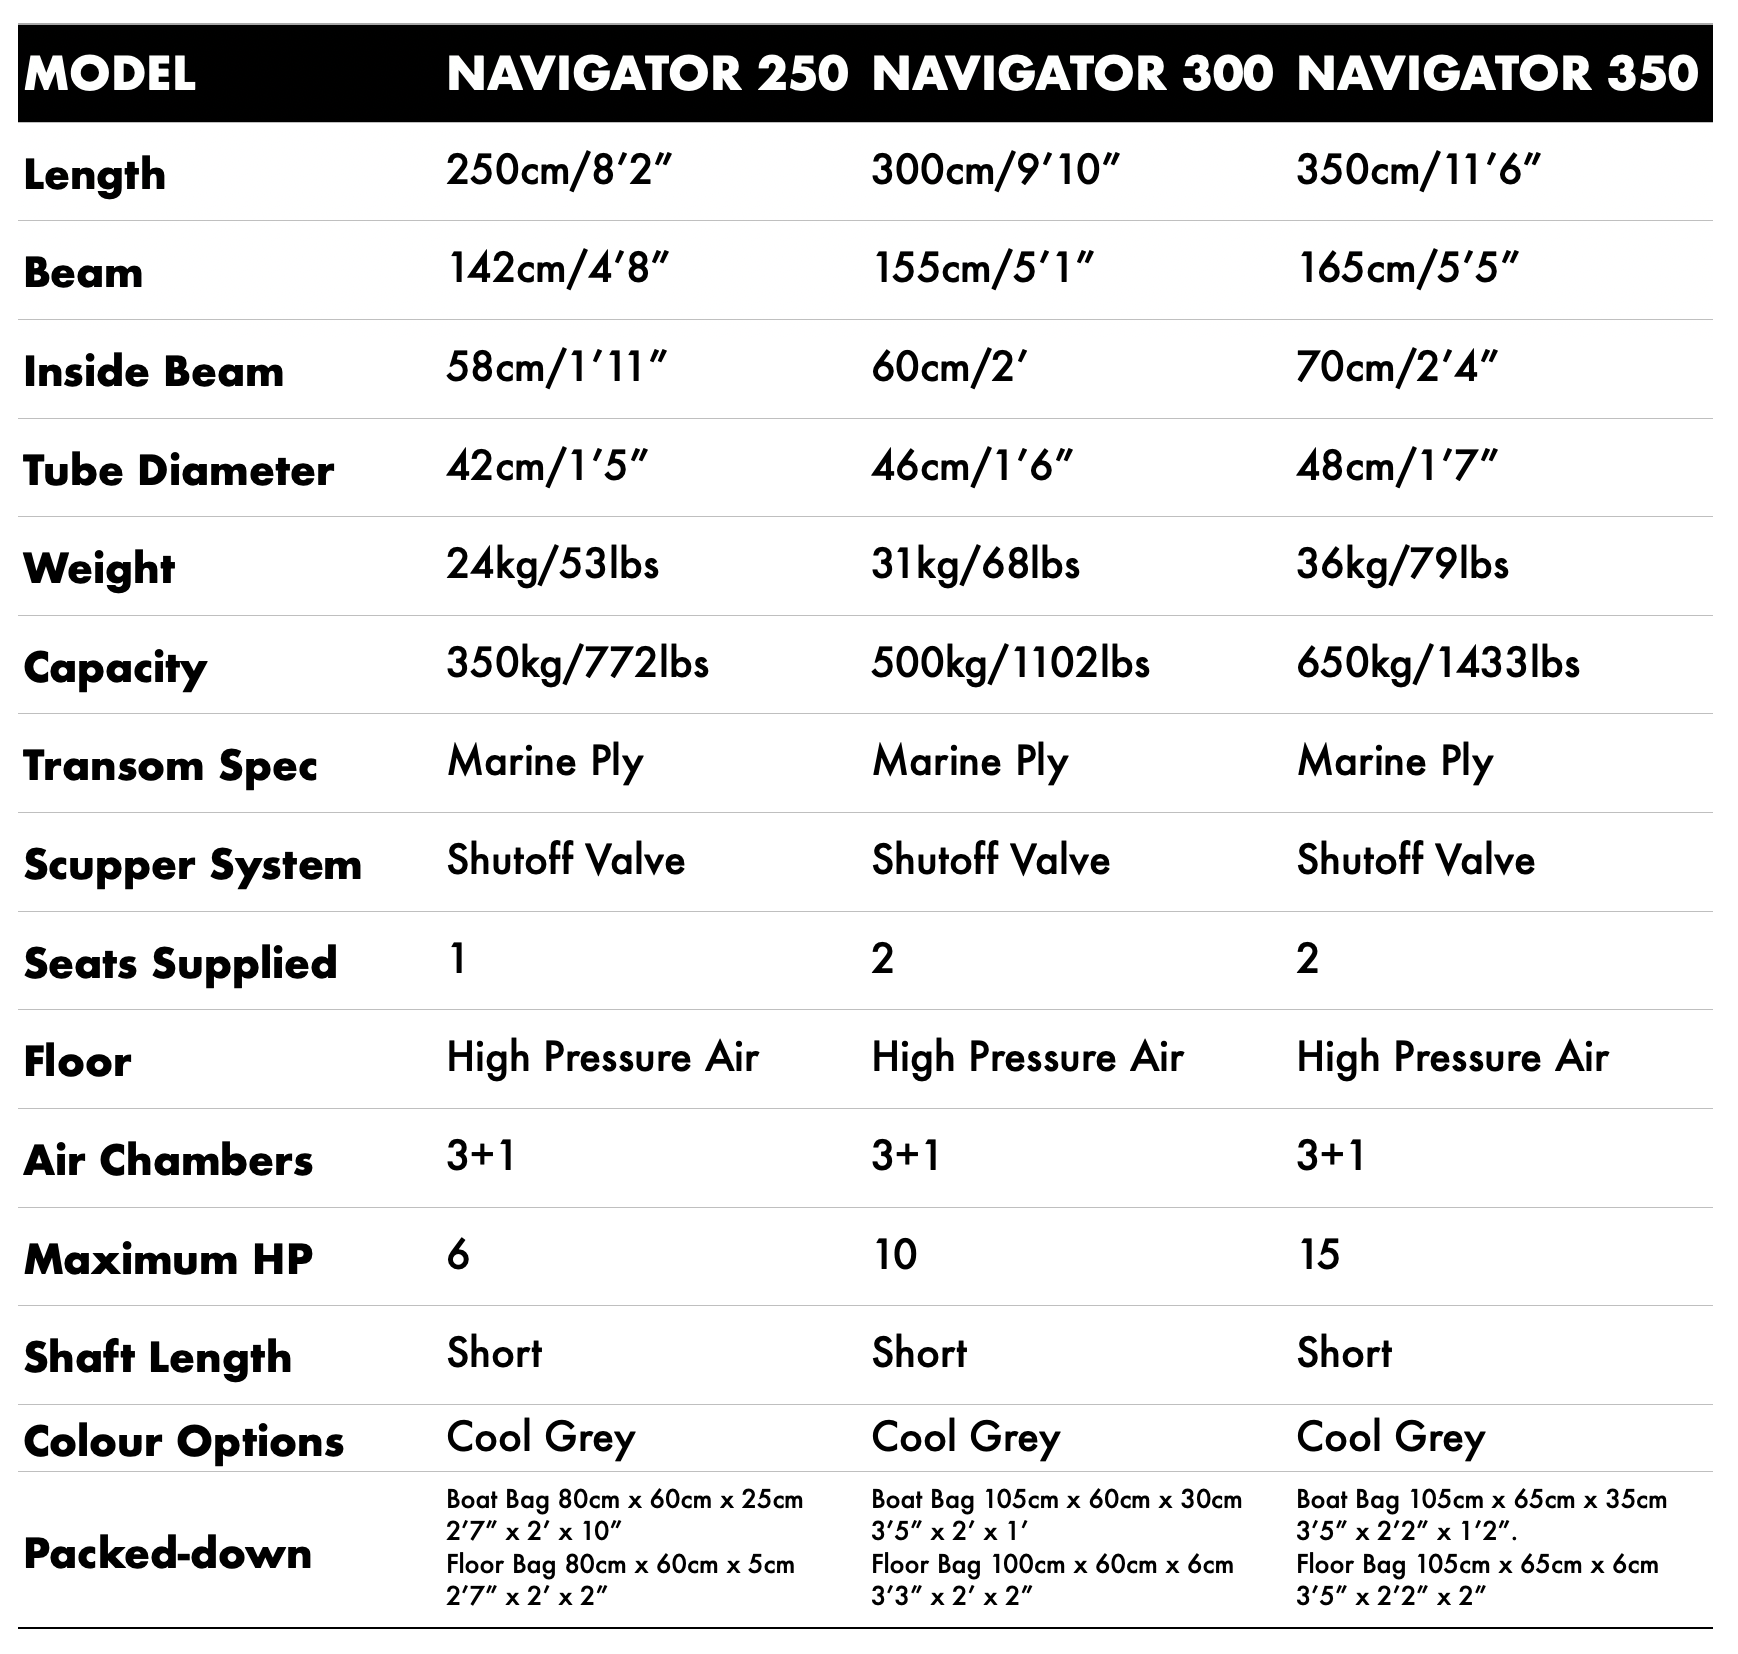 True Kit Navigator Range Specification Sheet including details like length, beam, weight, packed down sizes